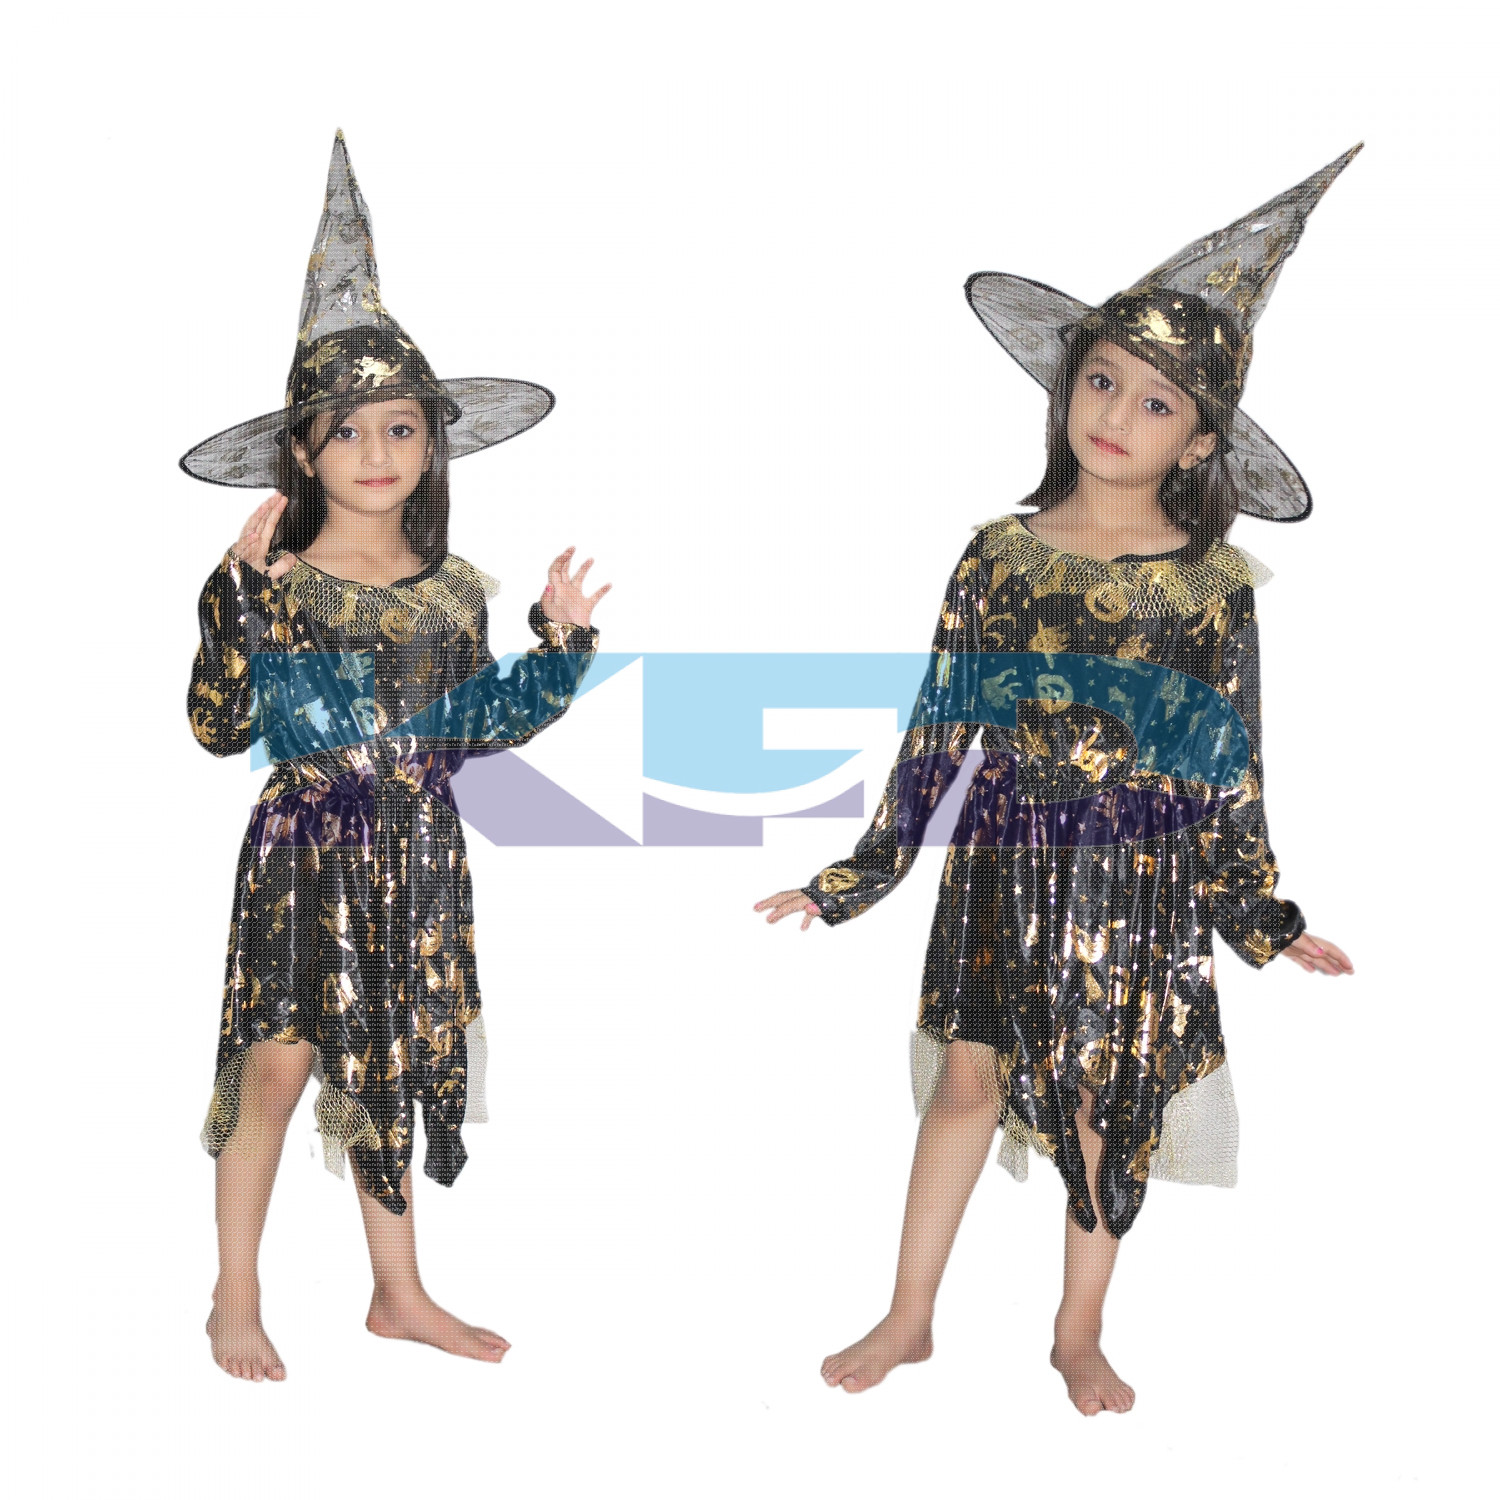  Witch Cosplay Costume/California Costume/Halloween Costume For School Annual function/Theme Party/Competition/Stage Shows Dress